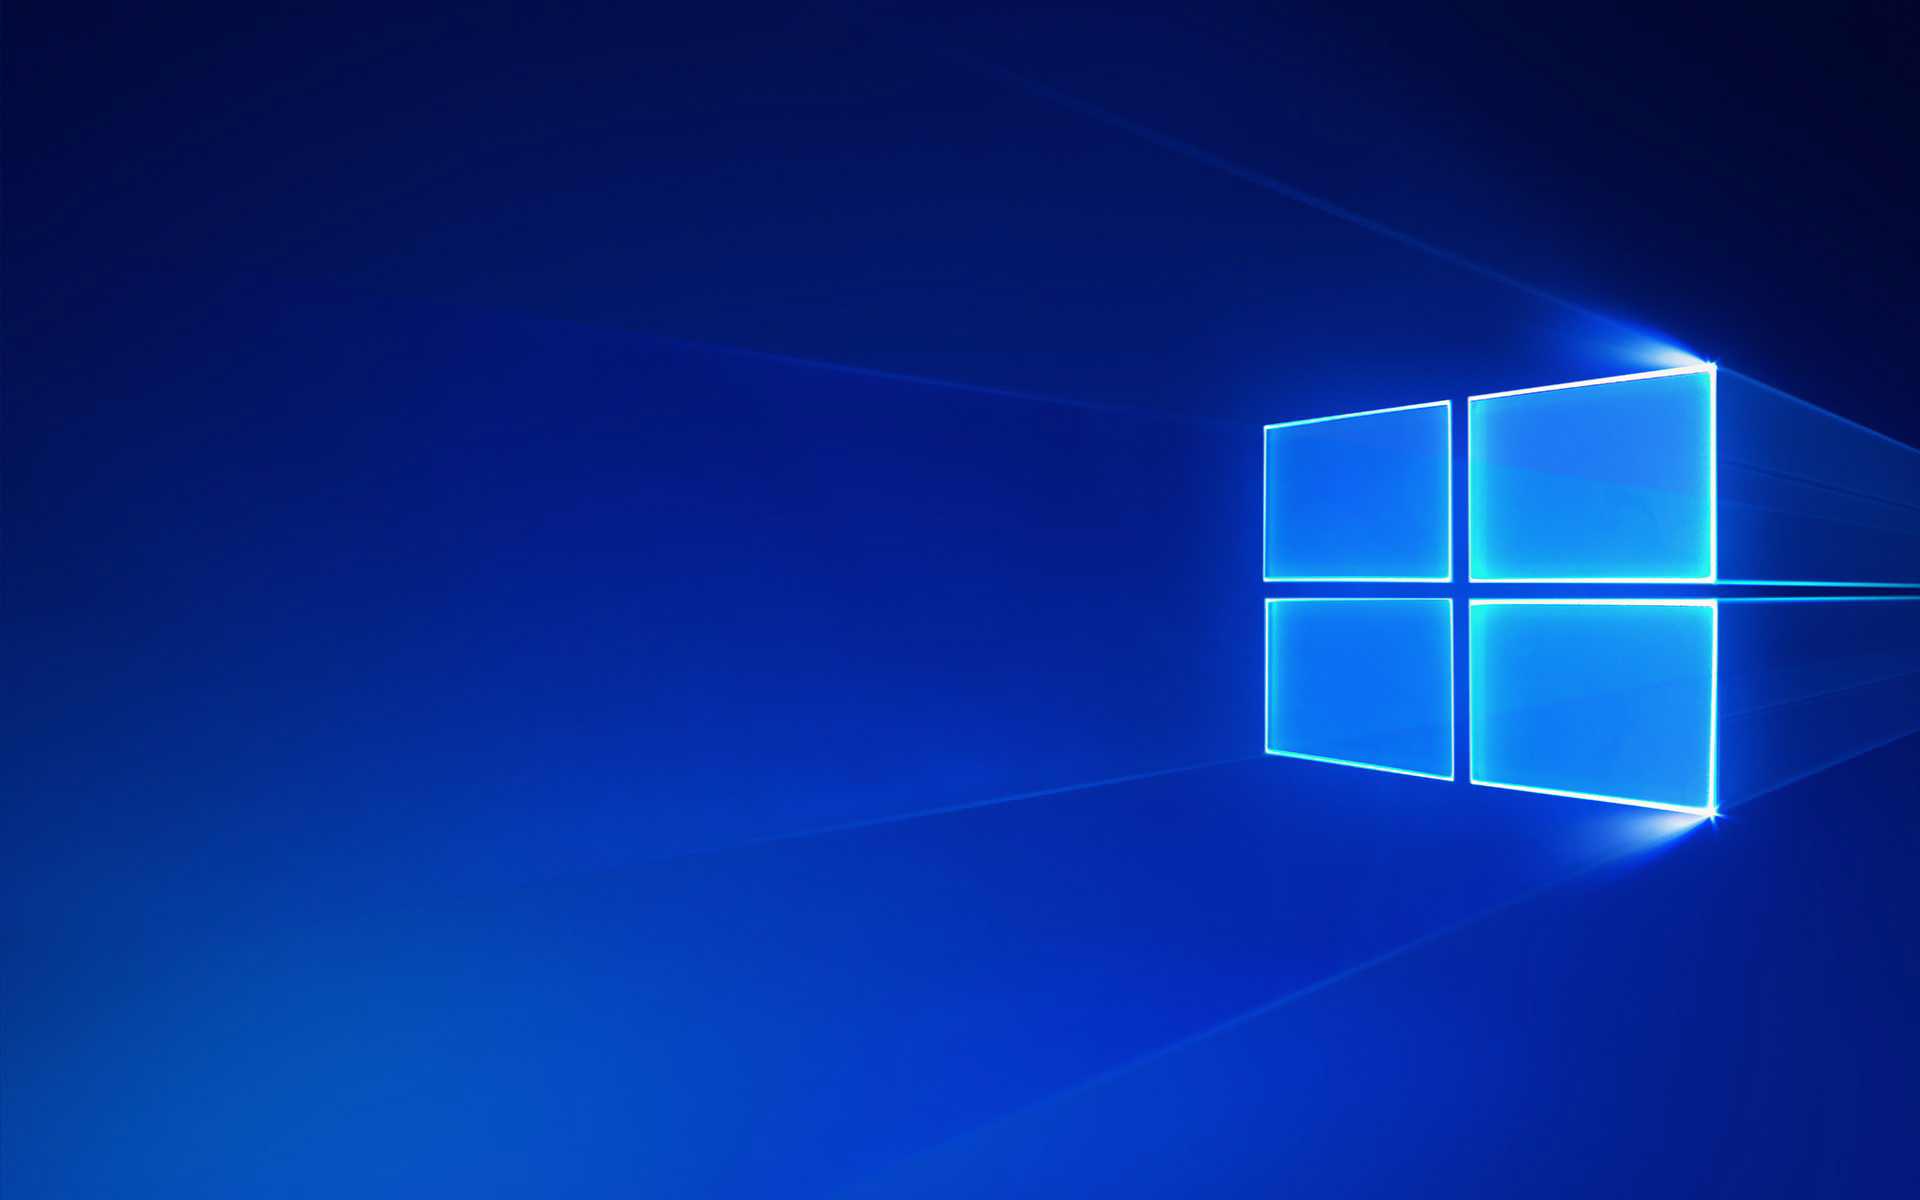 Windows 10 Redstone 3 coming in September 2017, Redstone 4 and 5 next year